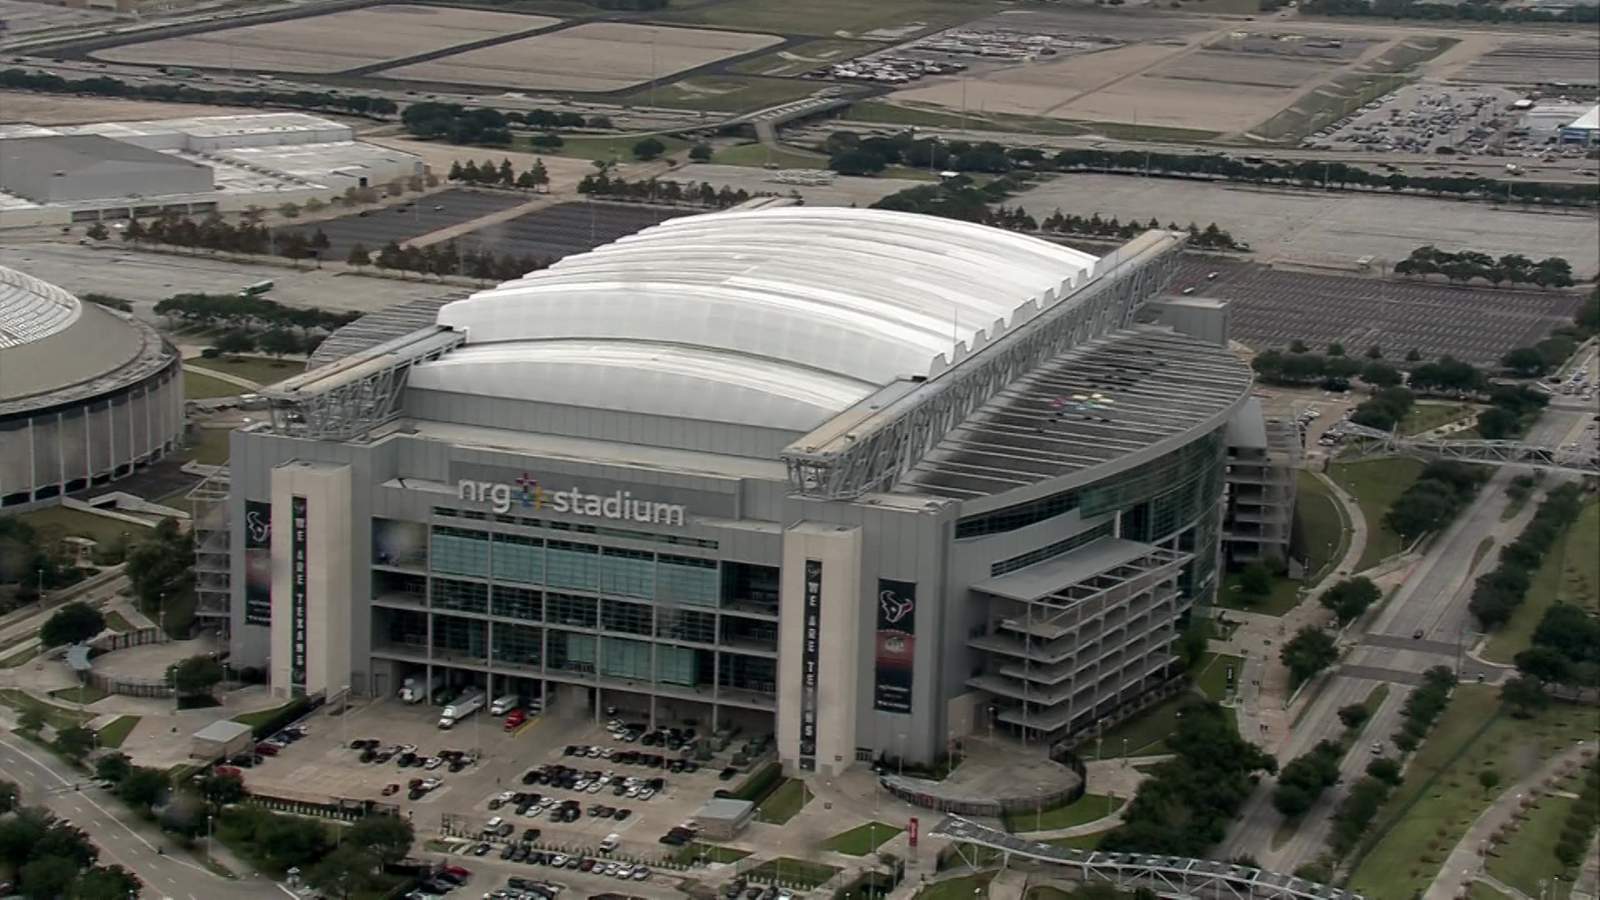 Raise the roof!: For first time in 6 years, NRG Stadium roof will open for Texans game